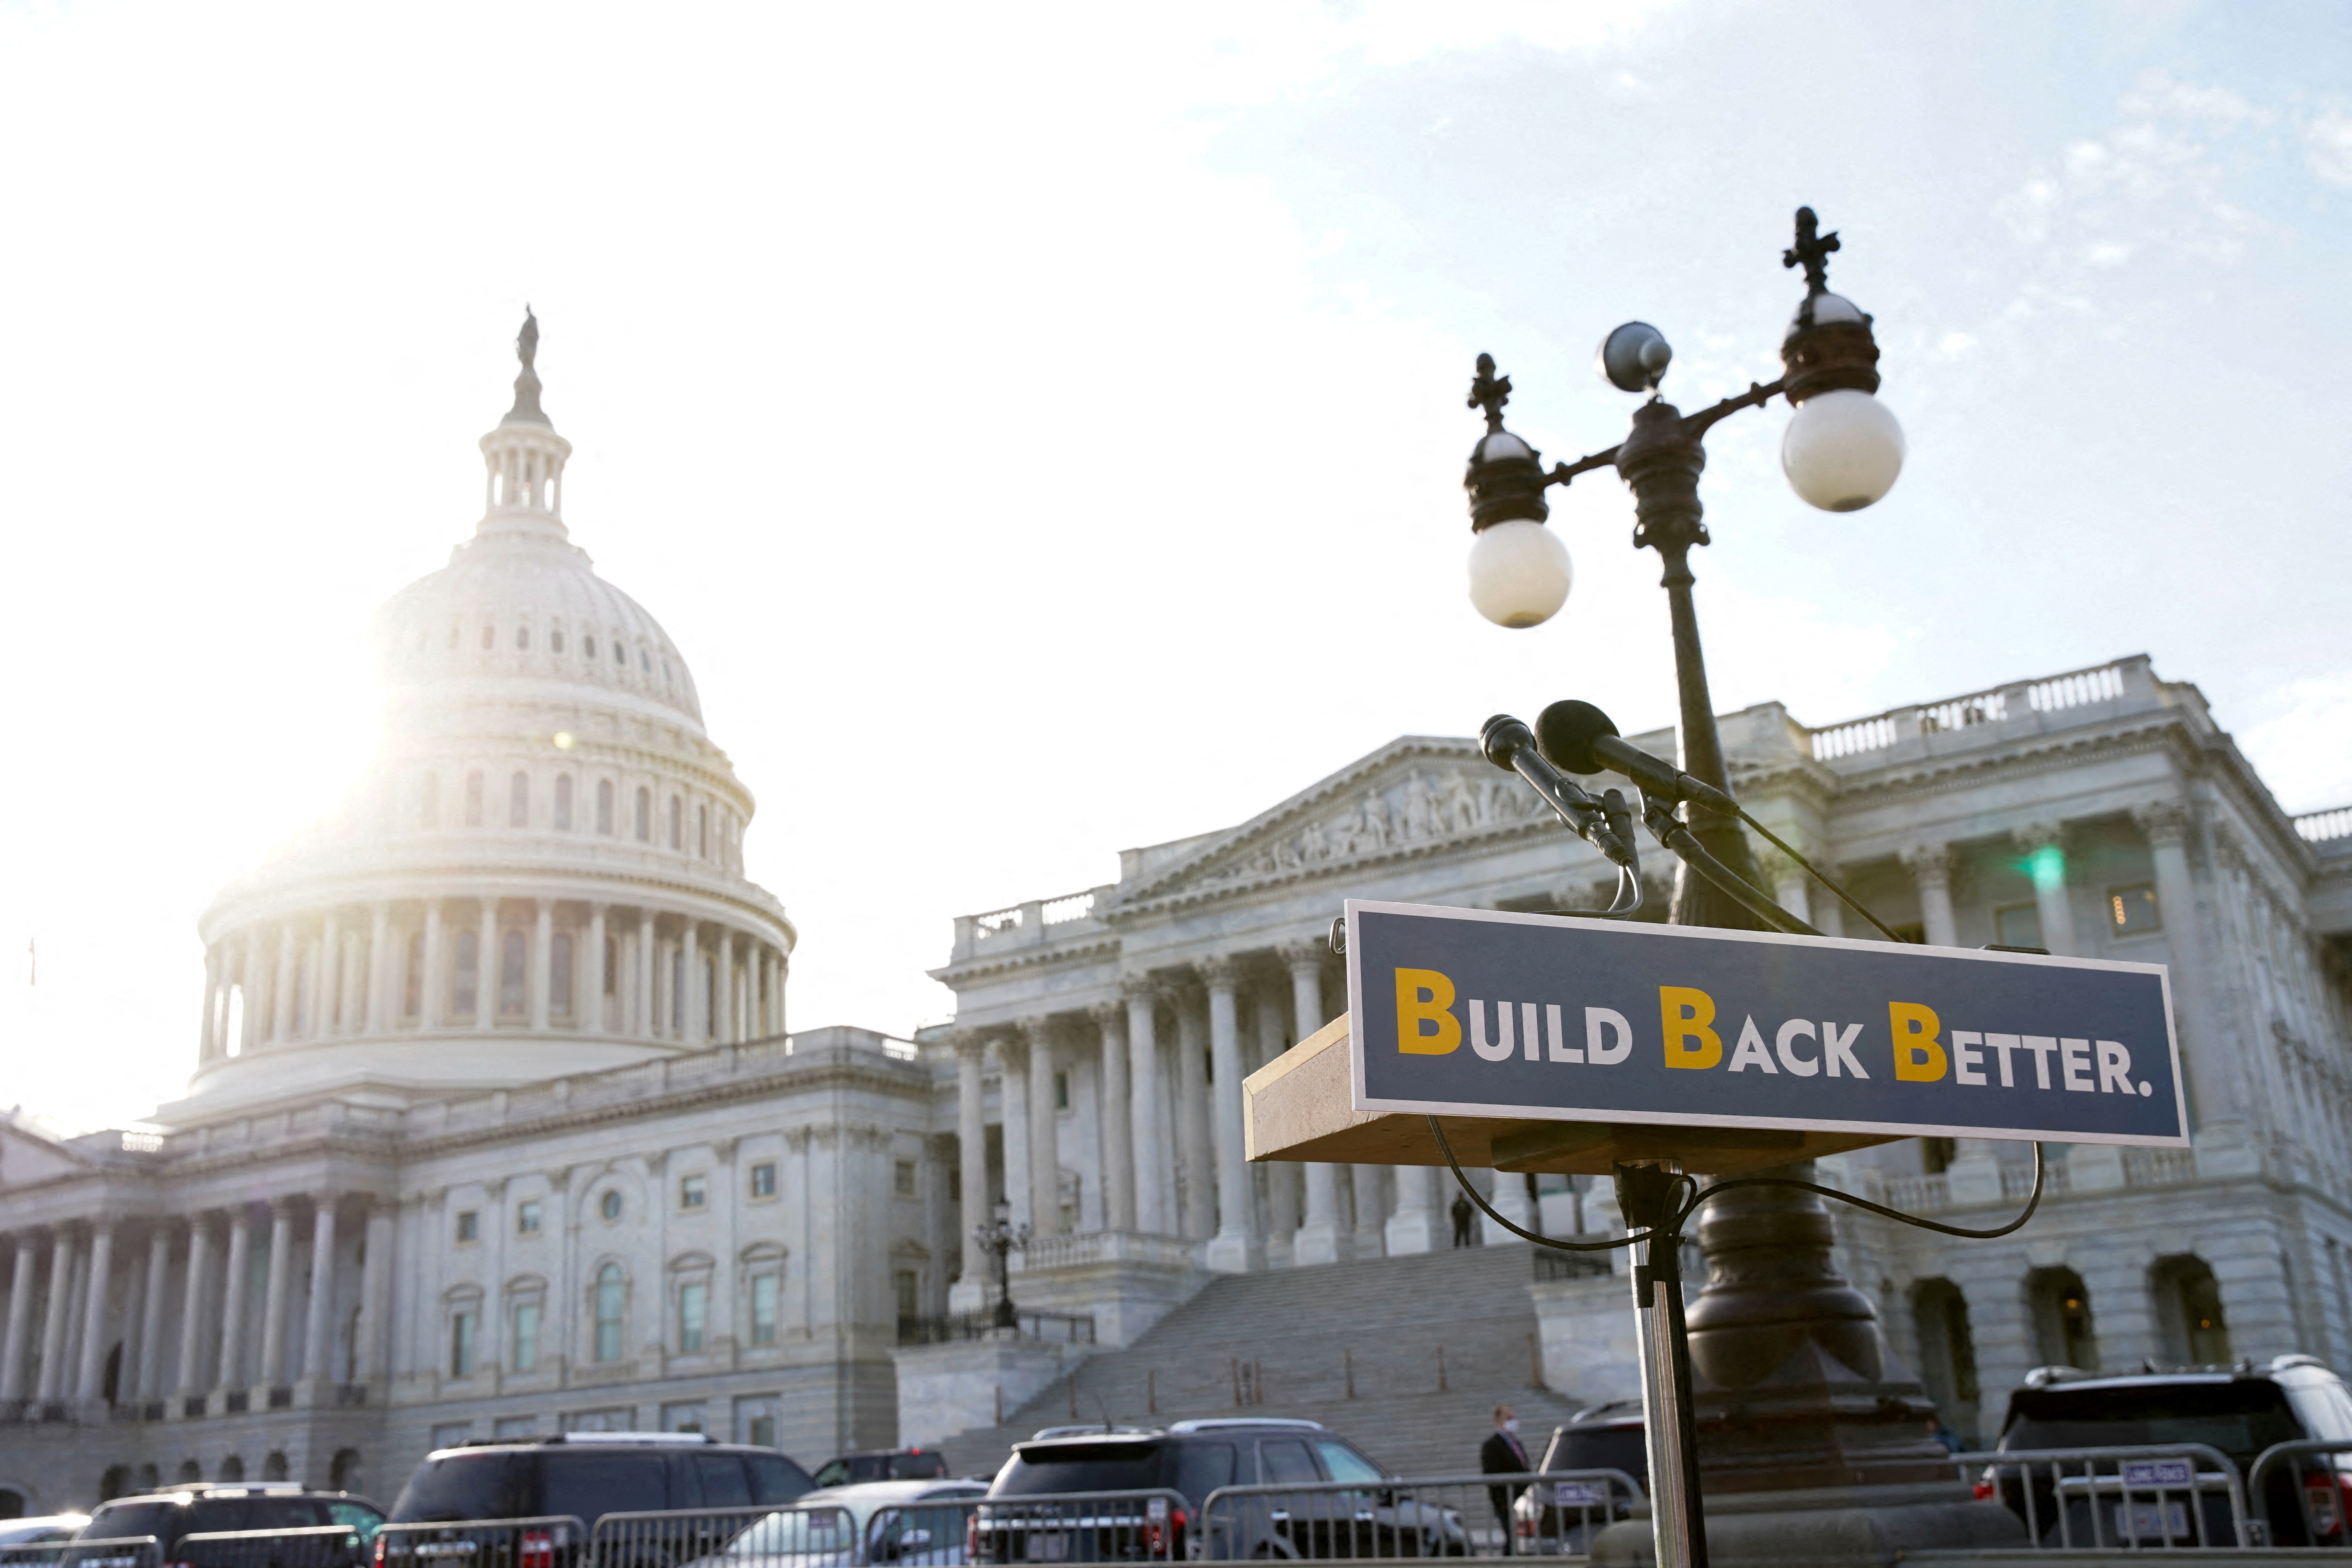 A lectern is seen before the start of a media event about the Build Back Better package with Senate Democrats outside the U.S. Capitol in Washington, December 15, 2021. REUTERS/Elizabeth Frantz/File Photo